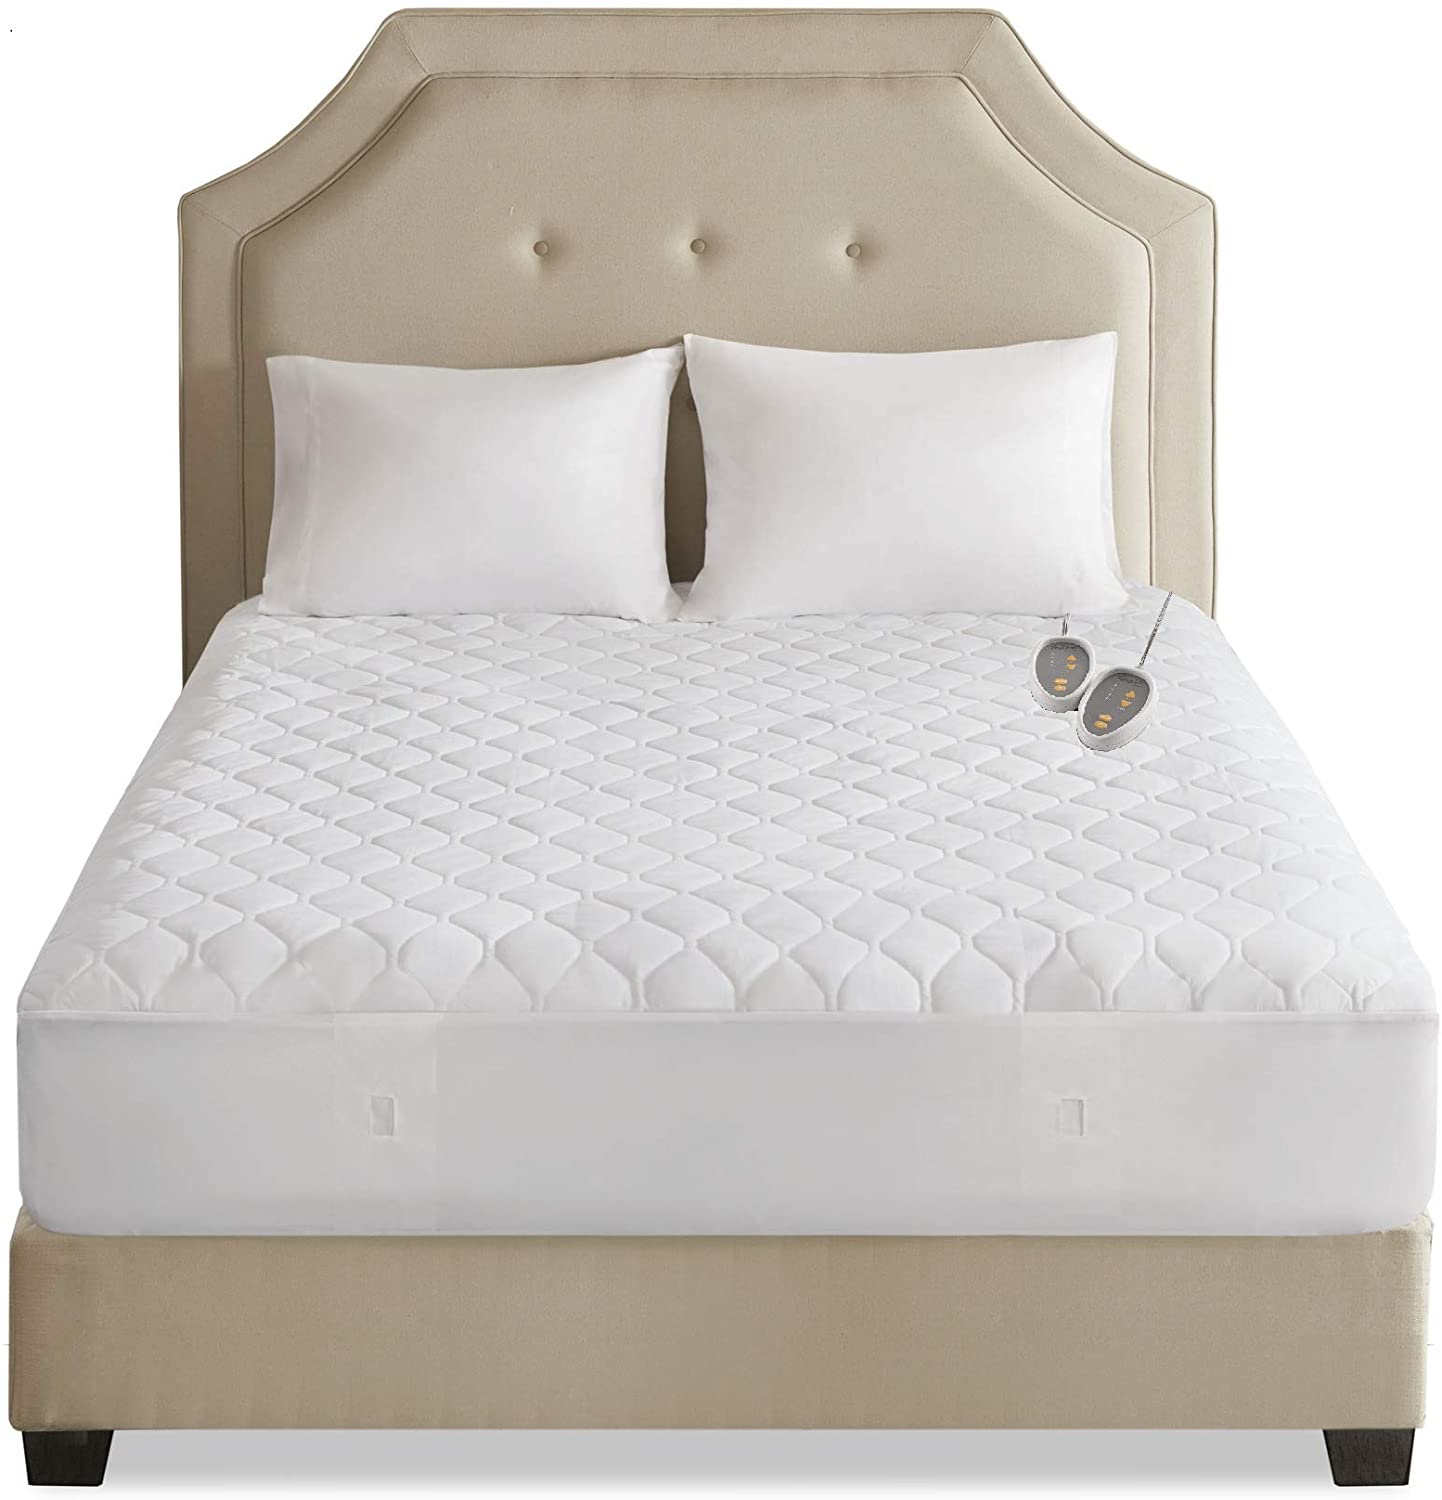 Quilted Heated Mattress Pad Mattress Heating Pad Electric Bed Warmer Cover Deep - $112.46 - $184.33